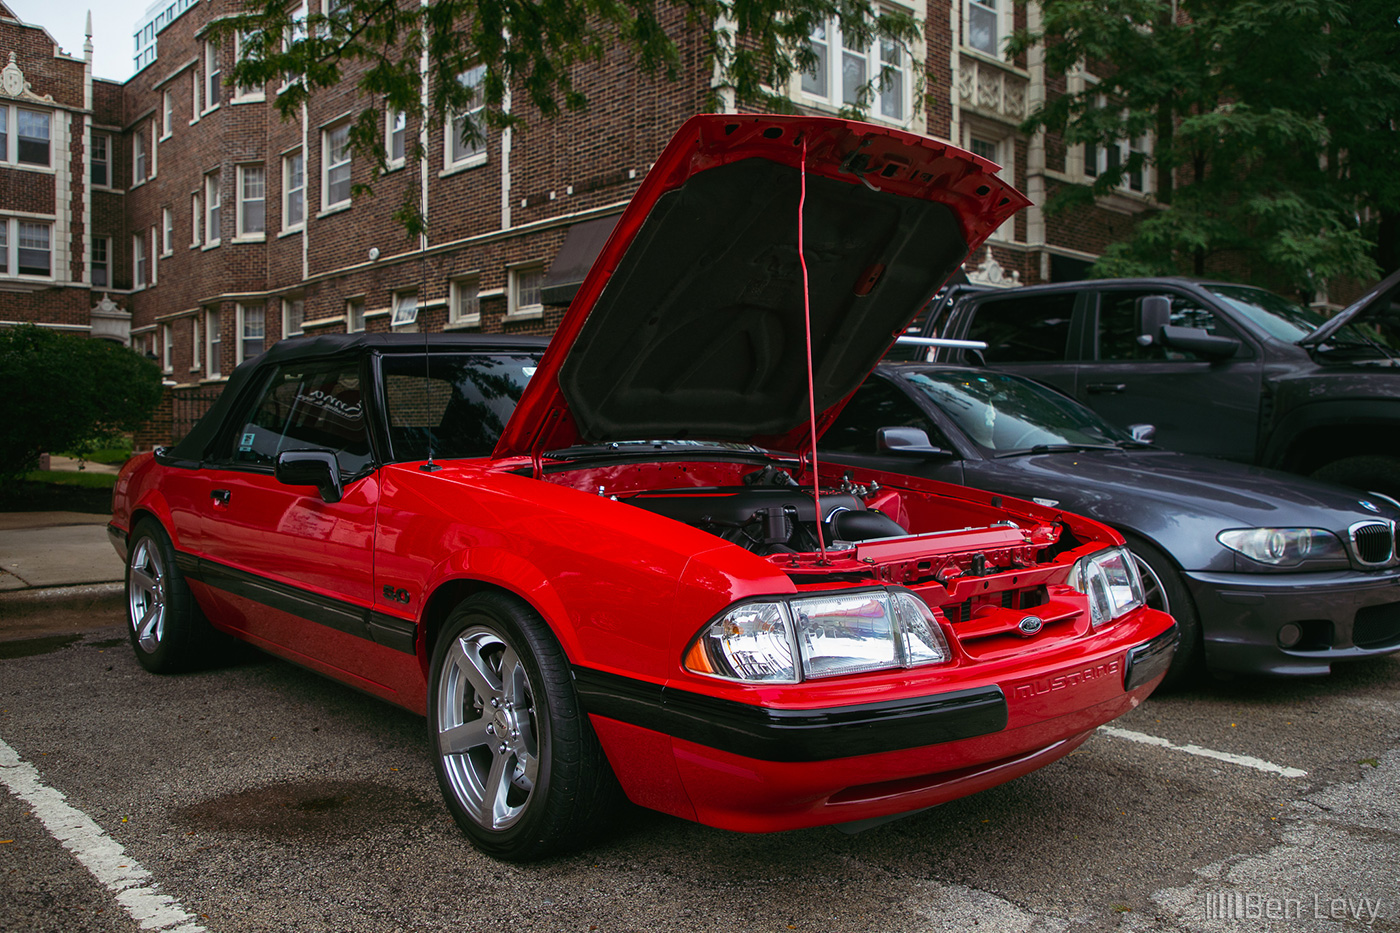 Clean Red Foxbody Convertible